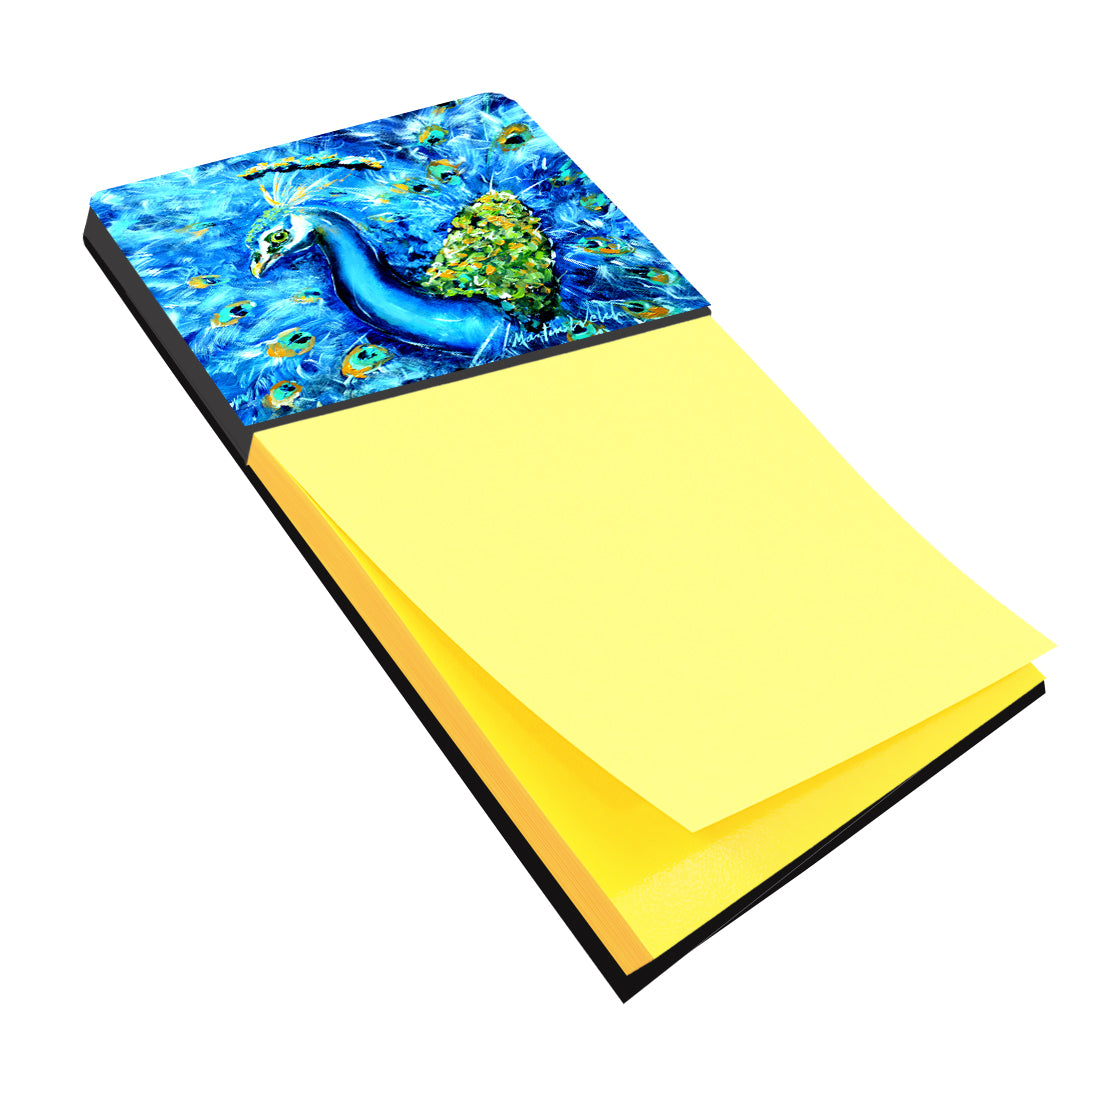 Buy this Peacock Straight Up in Blue Sticky Note Holder